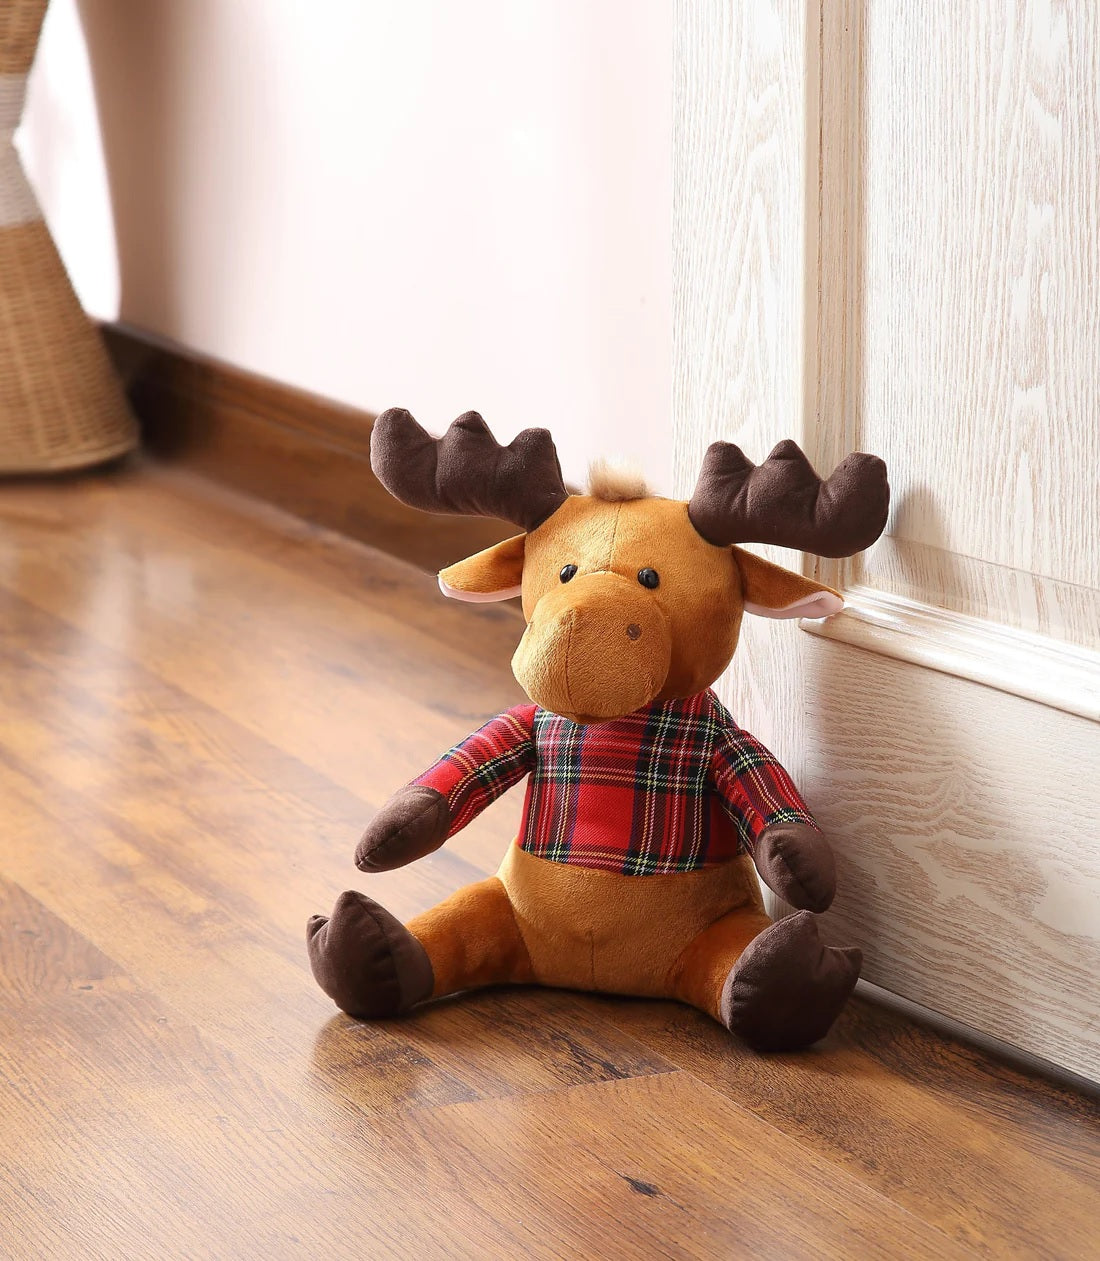 Morgan Fashions M653766 Maurice The Moose Christmas Door Stopper, Brown